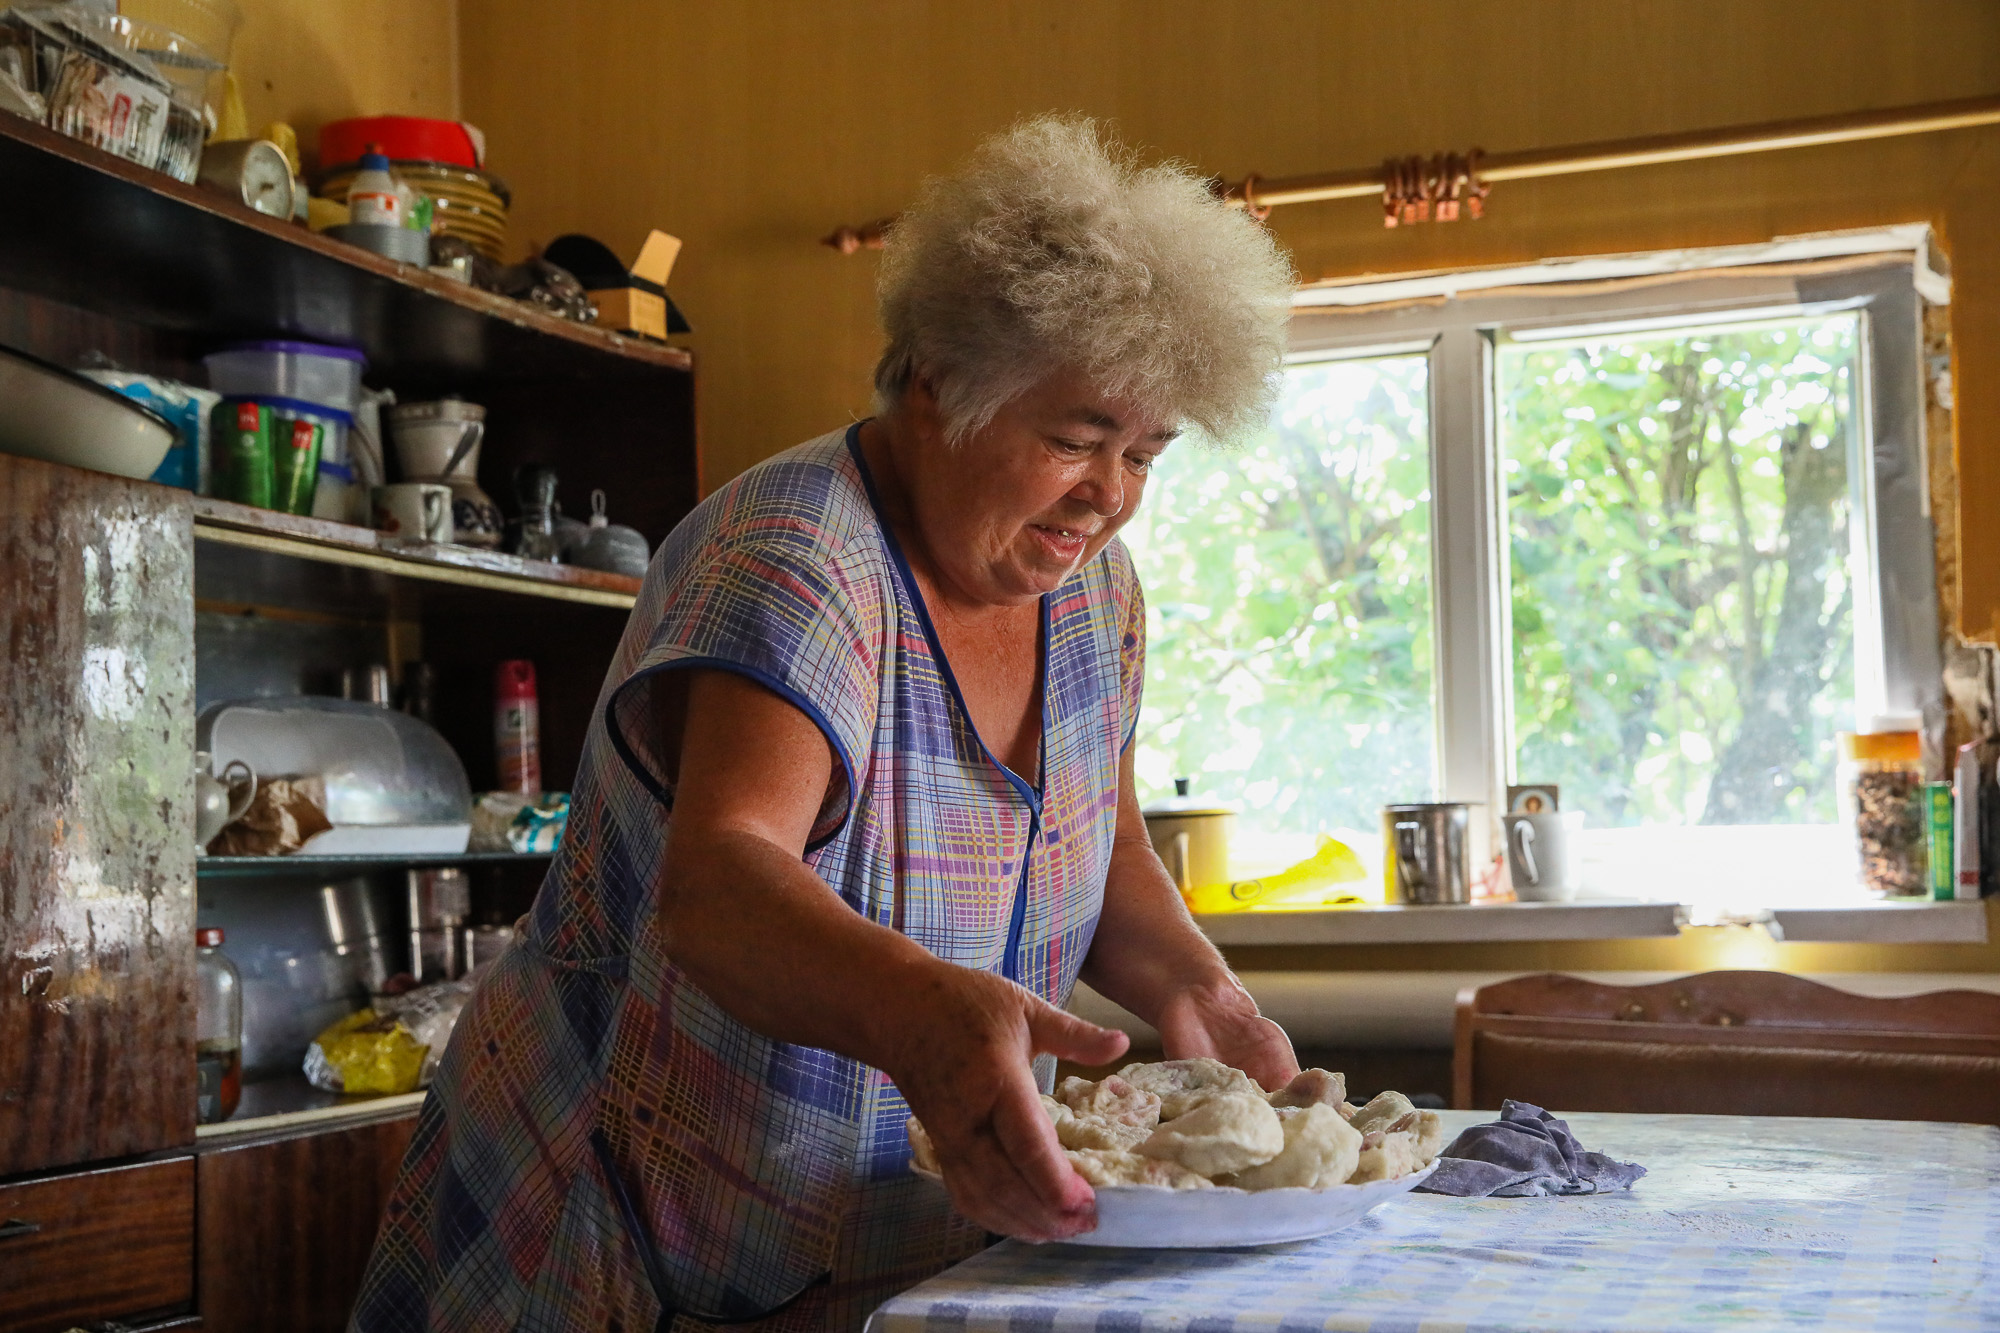 Anna Goncharova, a local civilian, serves cherry dumplings for guests at her home in the town of Opytne on June 12, 2019.